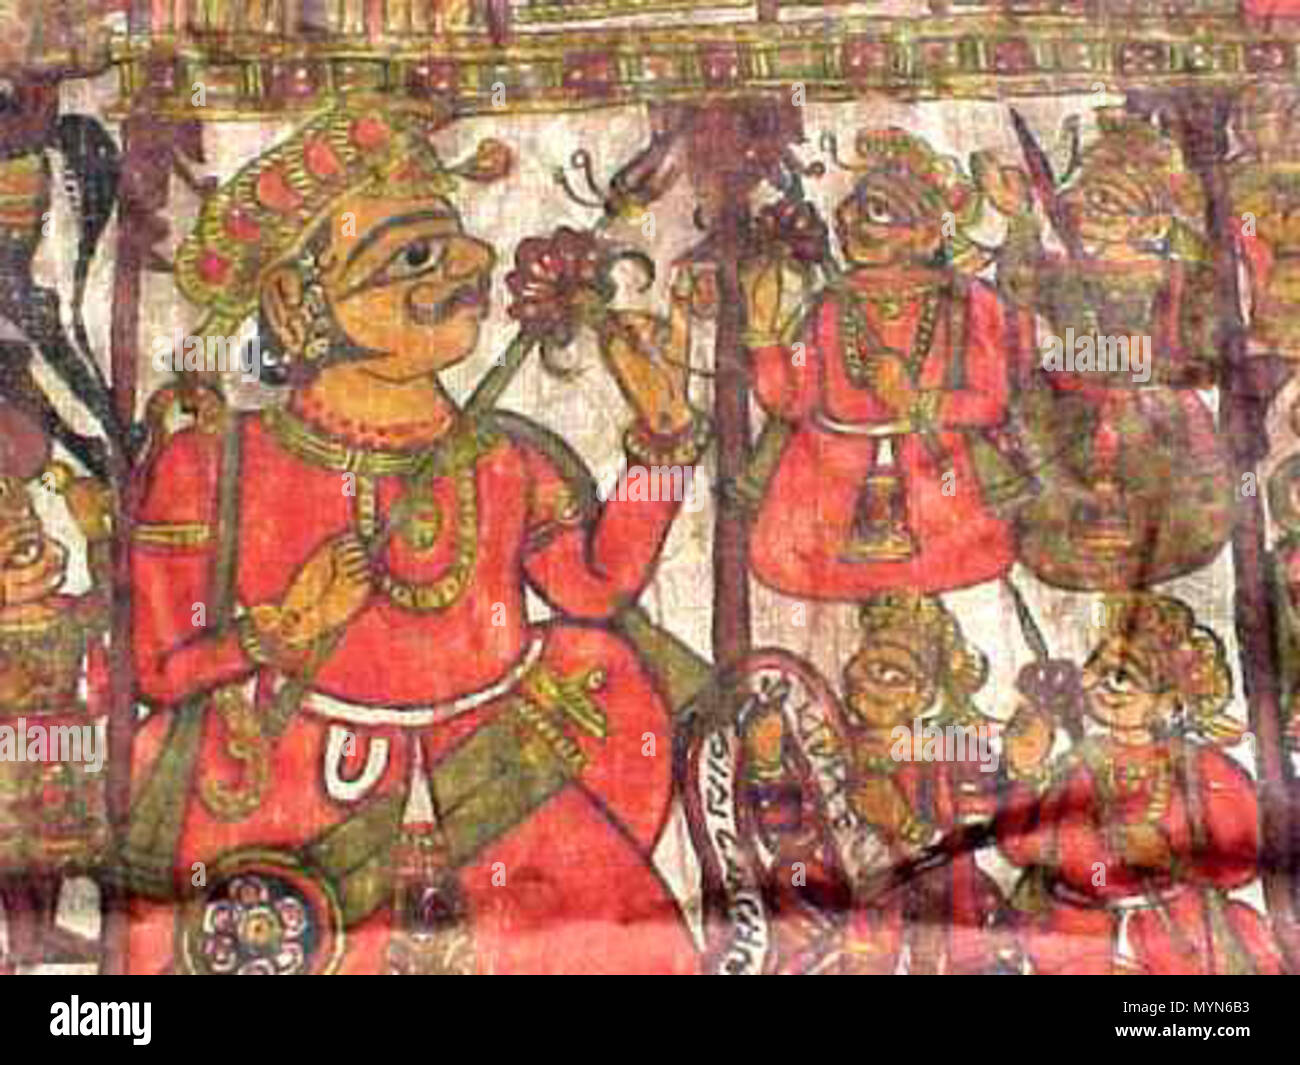 . English: A series of images of another par of Pabuji, this one from the early 19th century Source: ebay, April 2002 'This is an old (mid 1800s or earlier) Par. The painted textile is approximately 16 feet long and 55 1/2 inches wide. The story painting has been used to relay the story many times through the years and shows normal wear, especially on the bottom edge. There are some old repairs. The textile is made of two narrow pieces ( 26 3/4') sewen together. It appears to be an old linen-type material.' . early 19th century. Unknown 403 Pabuji2e Stock Photo